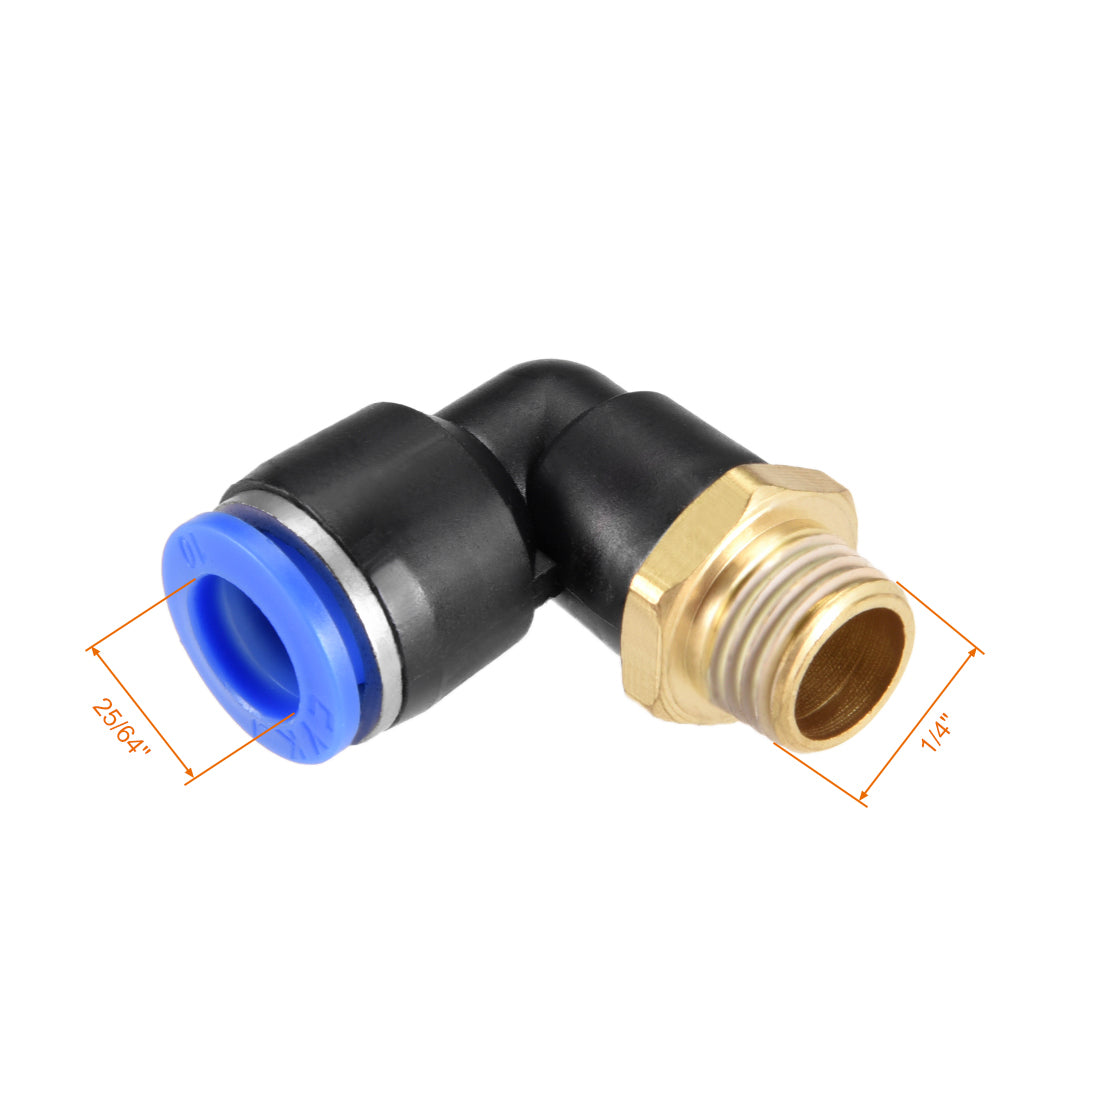 Uxcell Uxcell PL6-02 Pneumatic Push to Connect Fitting, Male Elbow - 15/64" Tube OD x 1/4" G Thread Tube Fitting Blue 4pcs